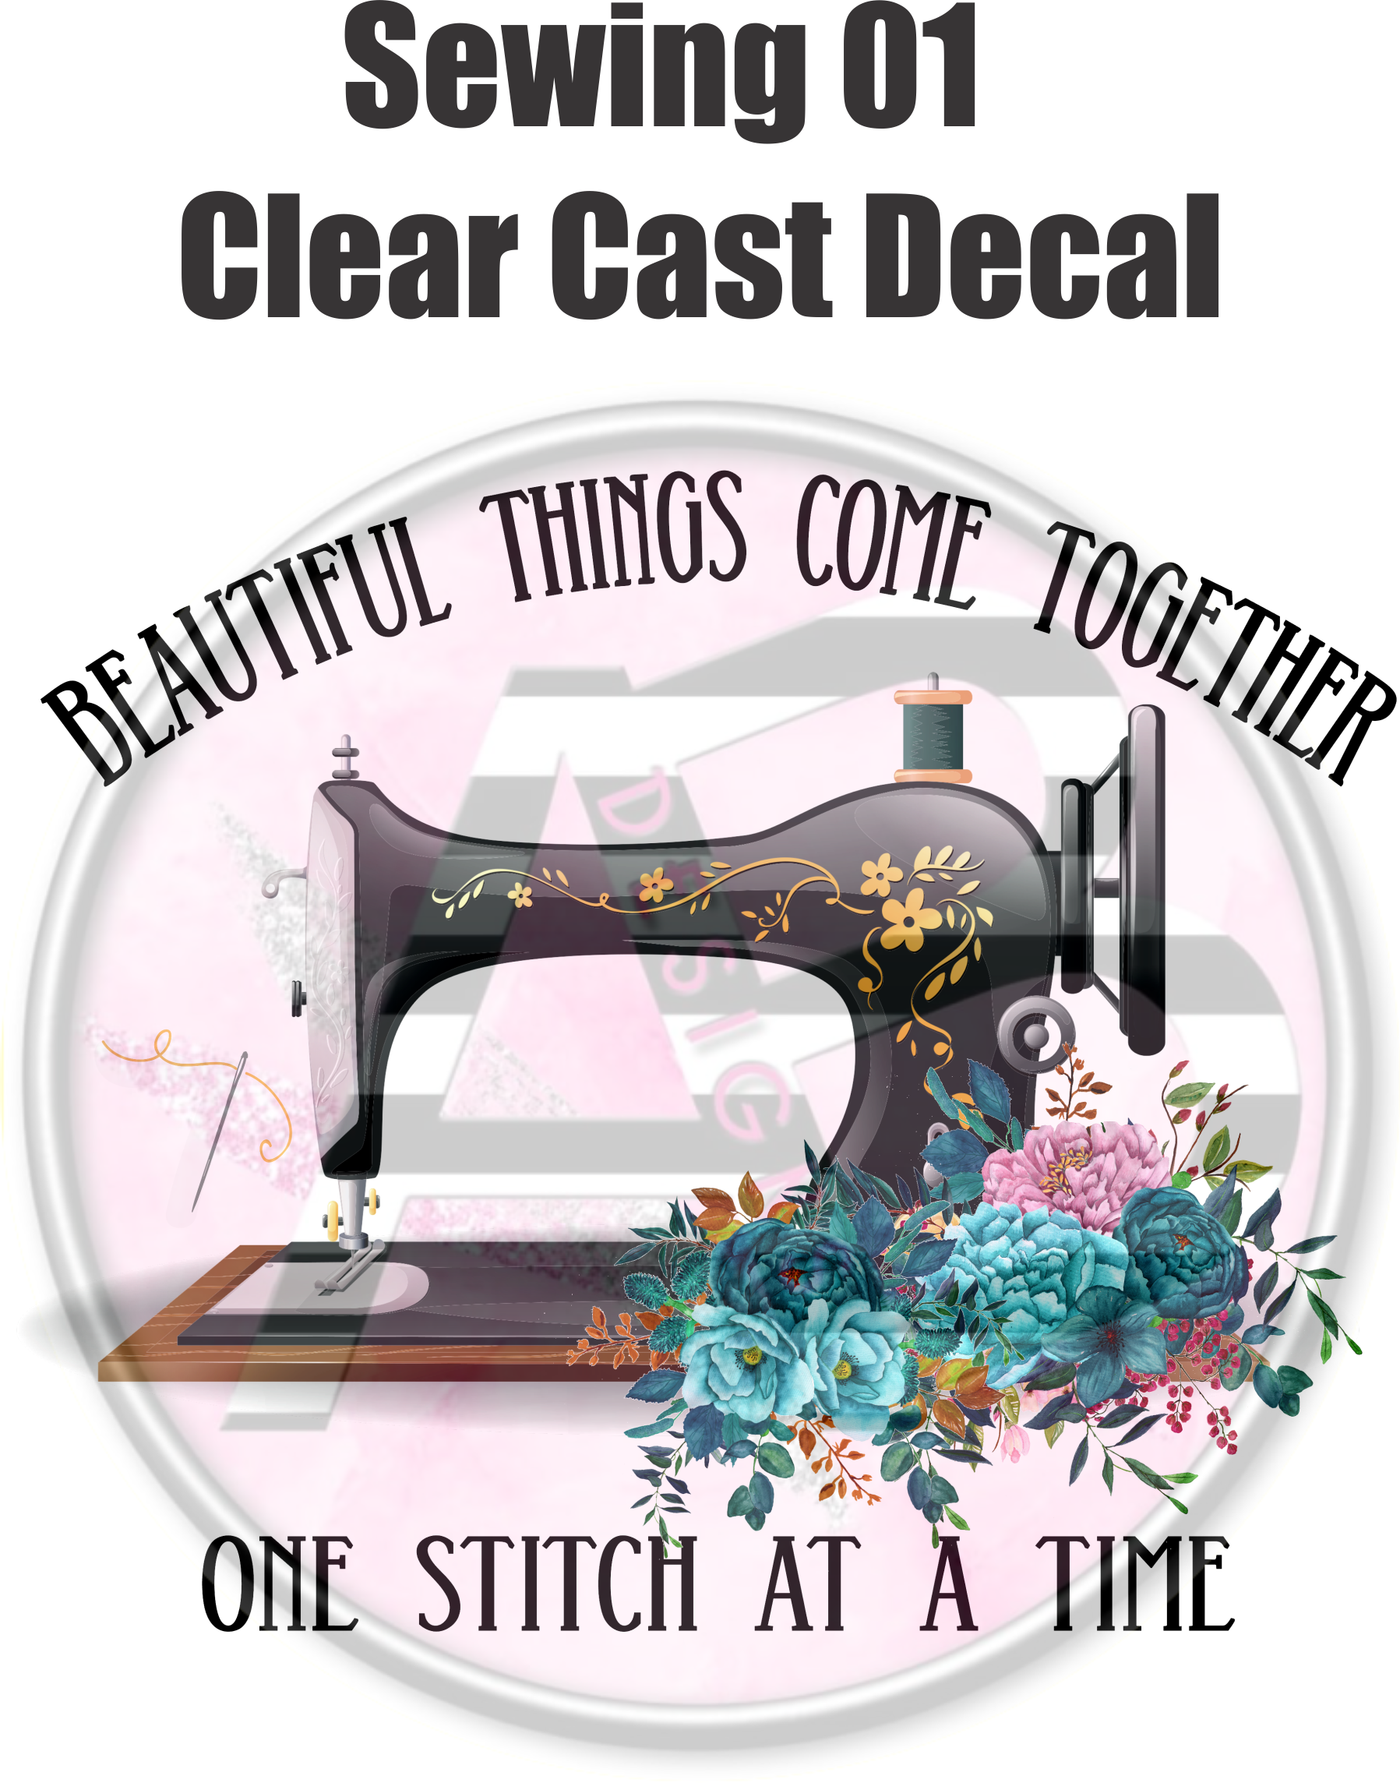 Sewing 01 - Clear Cast Decal